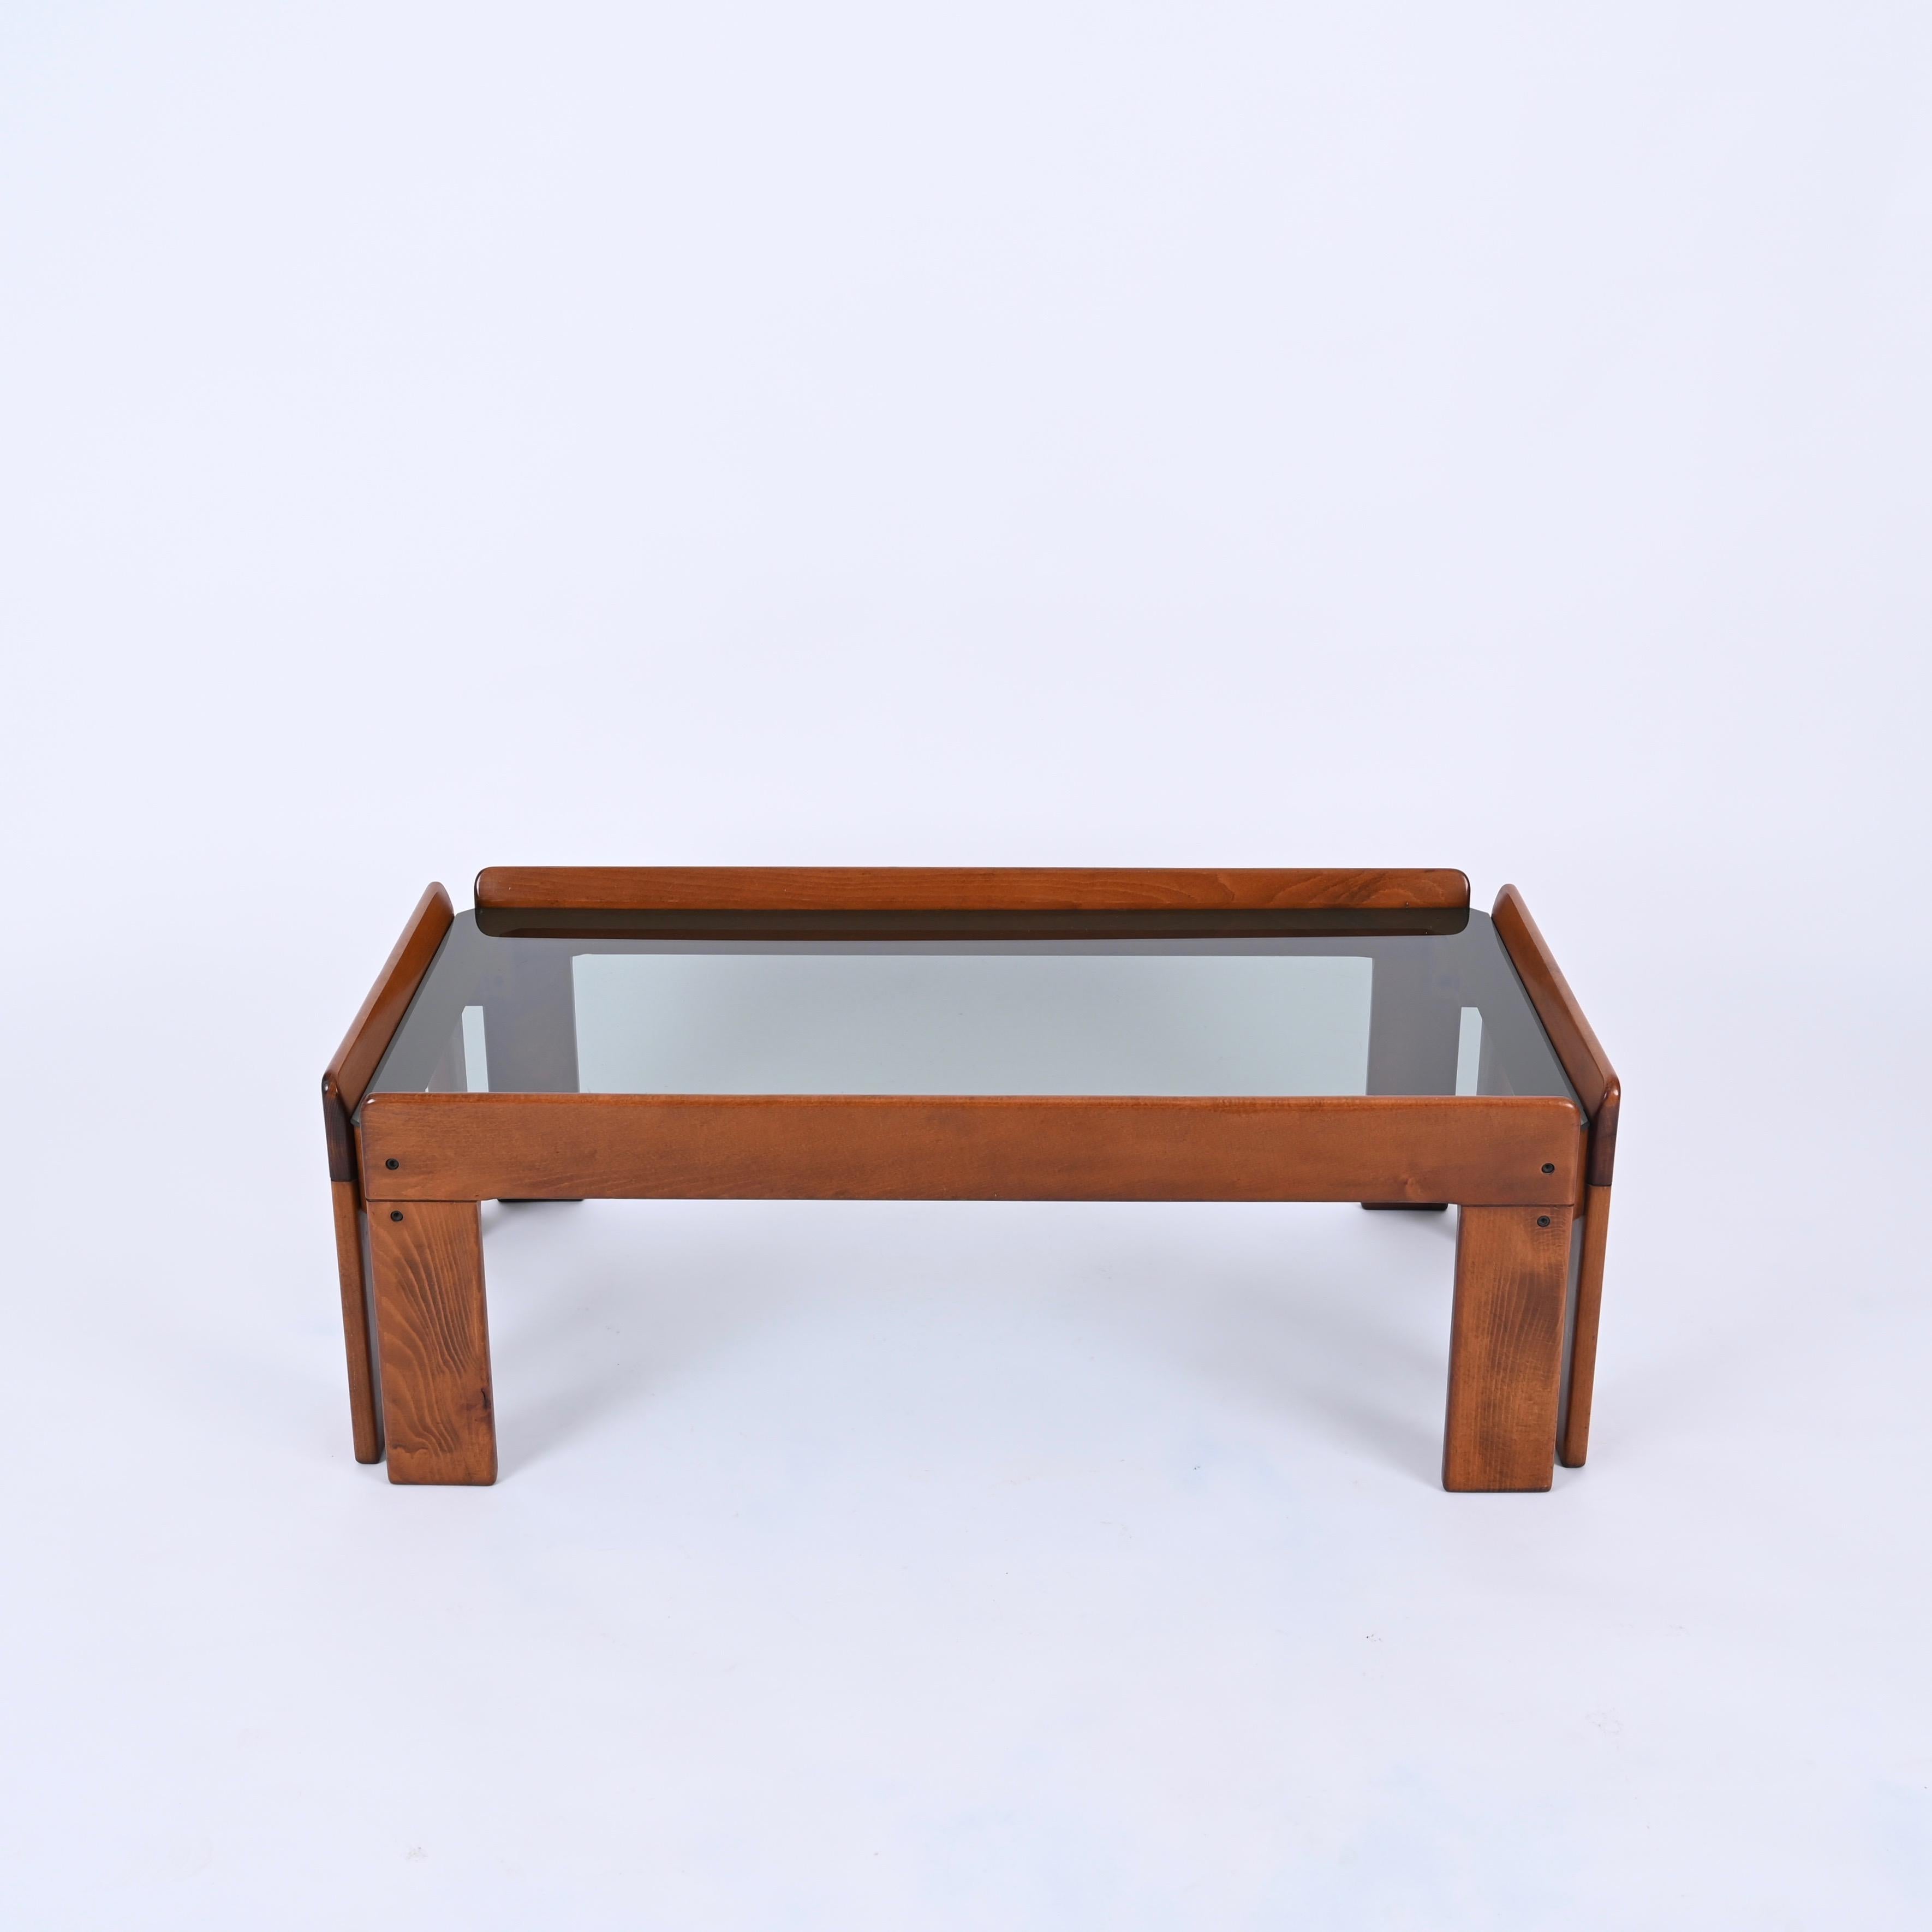 Glass Afra & Tobia Scarpa Mid-Century Walnut Coffee Table for Cassina, Italy 1960s For Sale